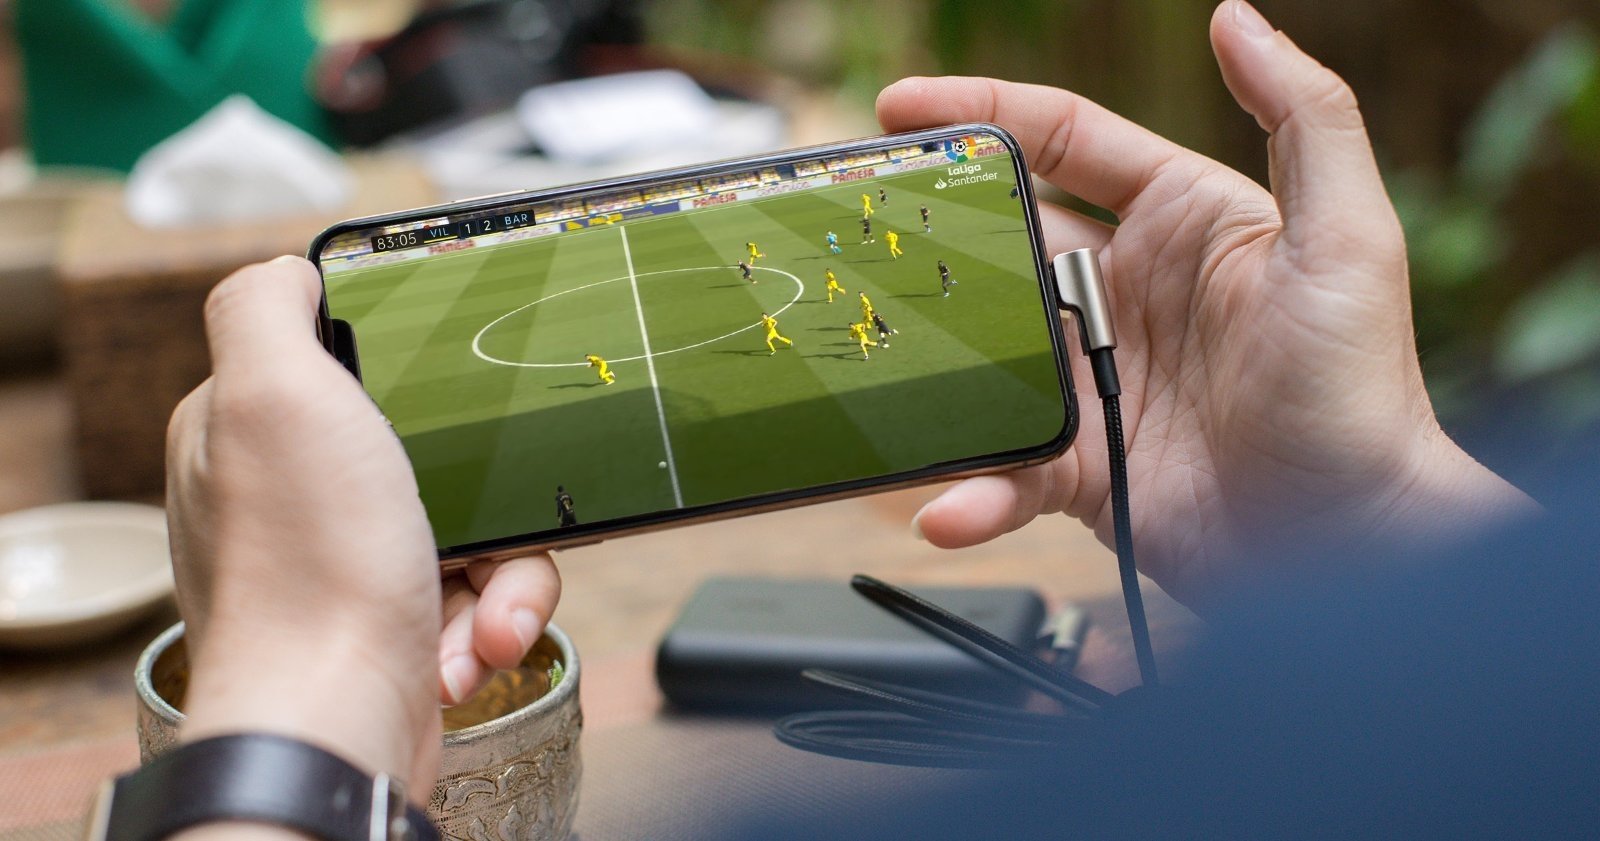 Watch football on mobile